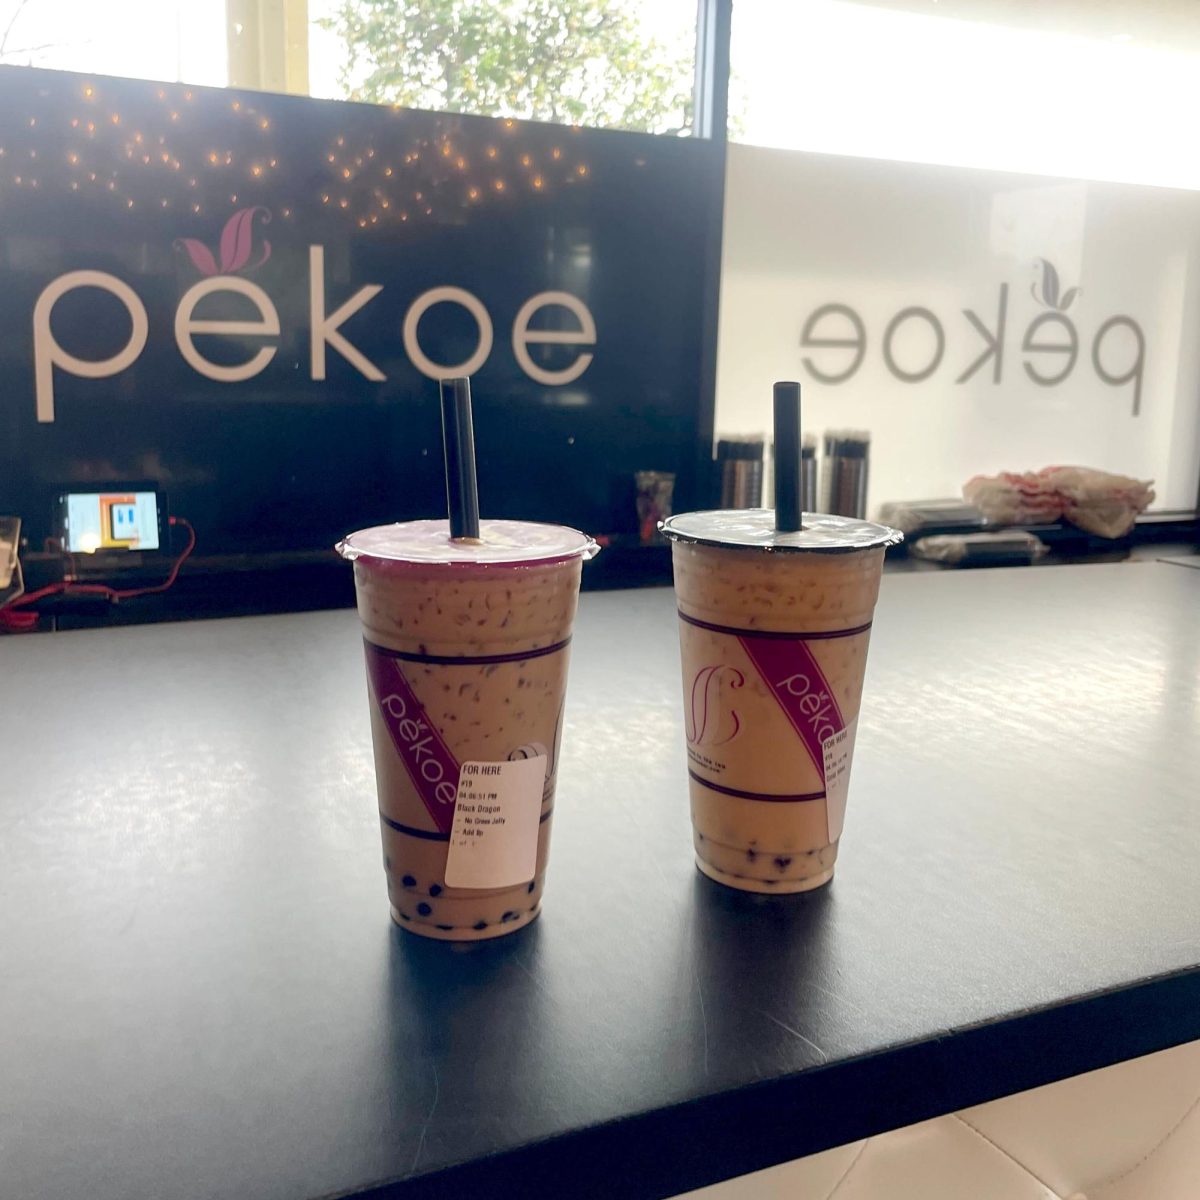 Two Pekoe teas sit on the bar in front of the Pekoe logo on Jan. 28.